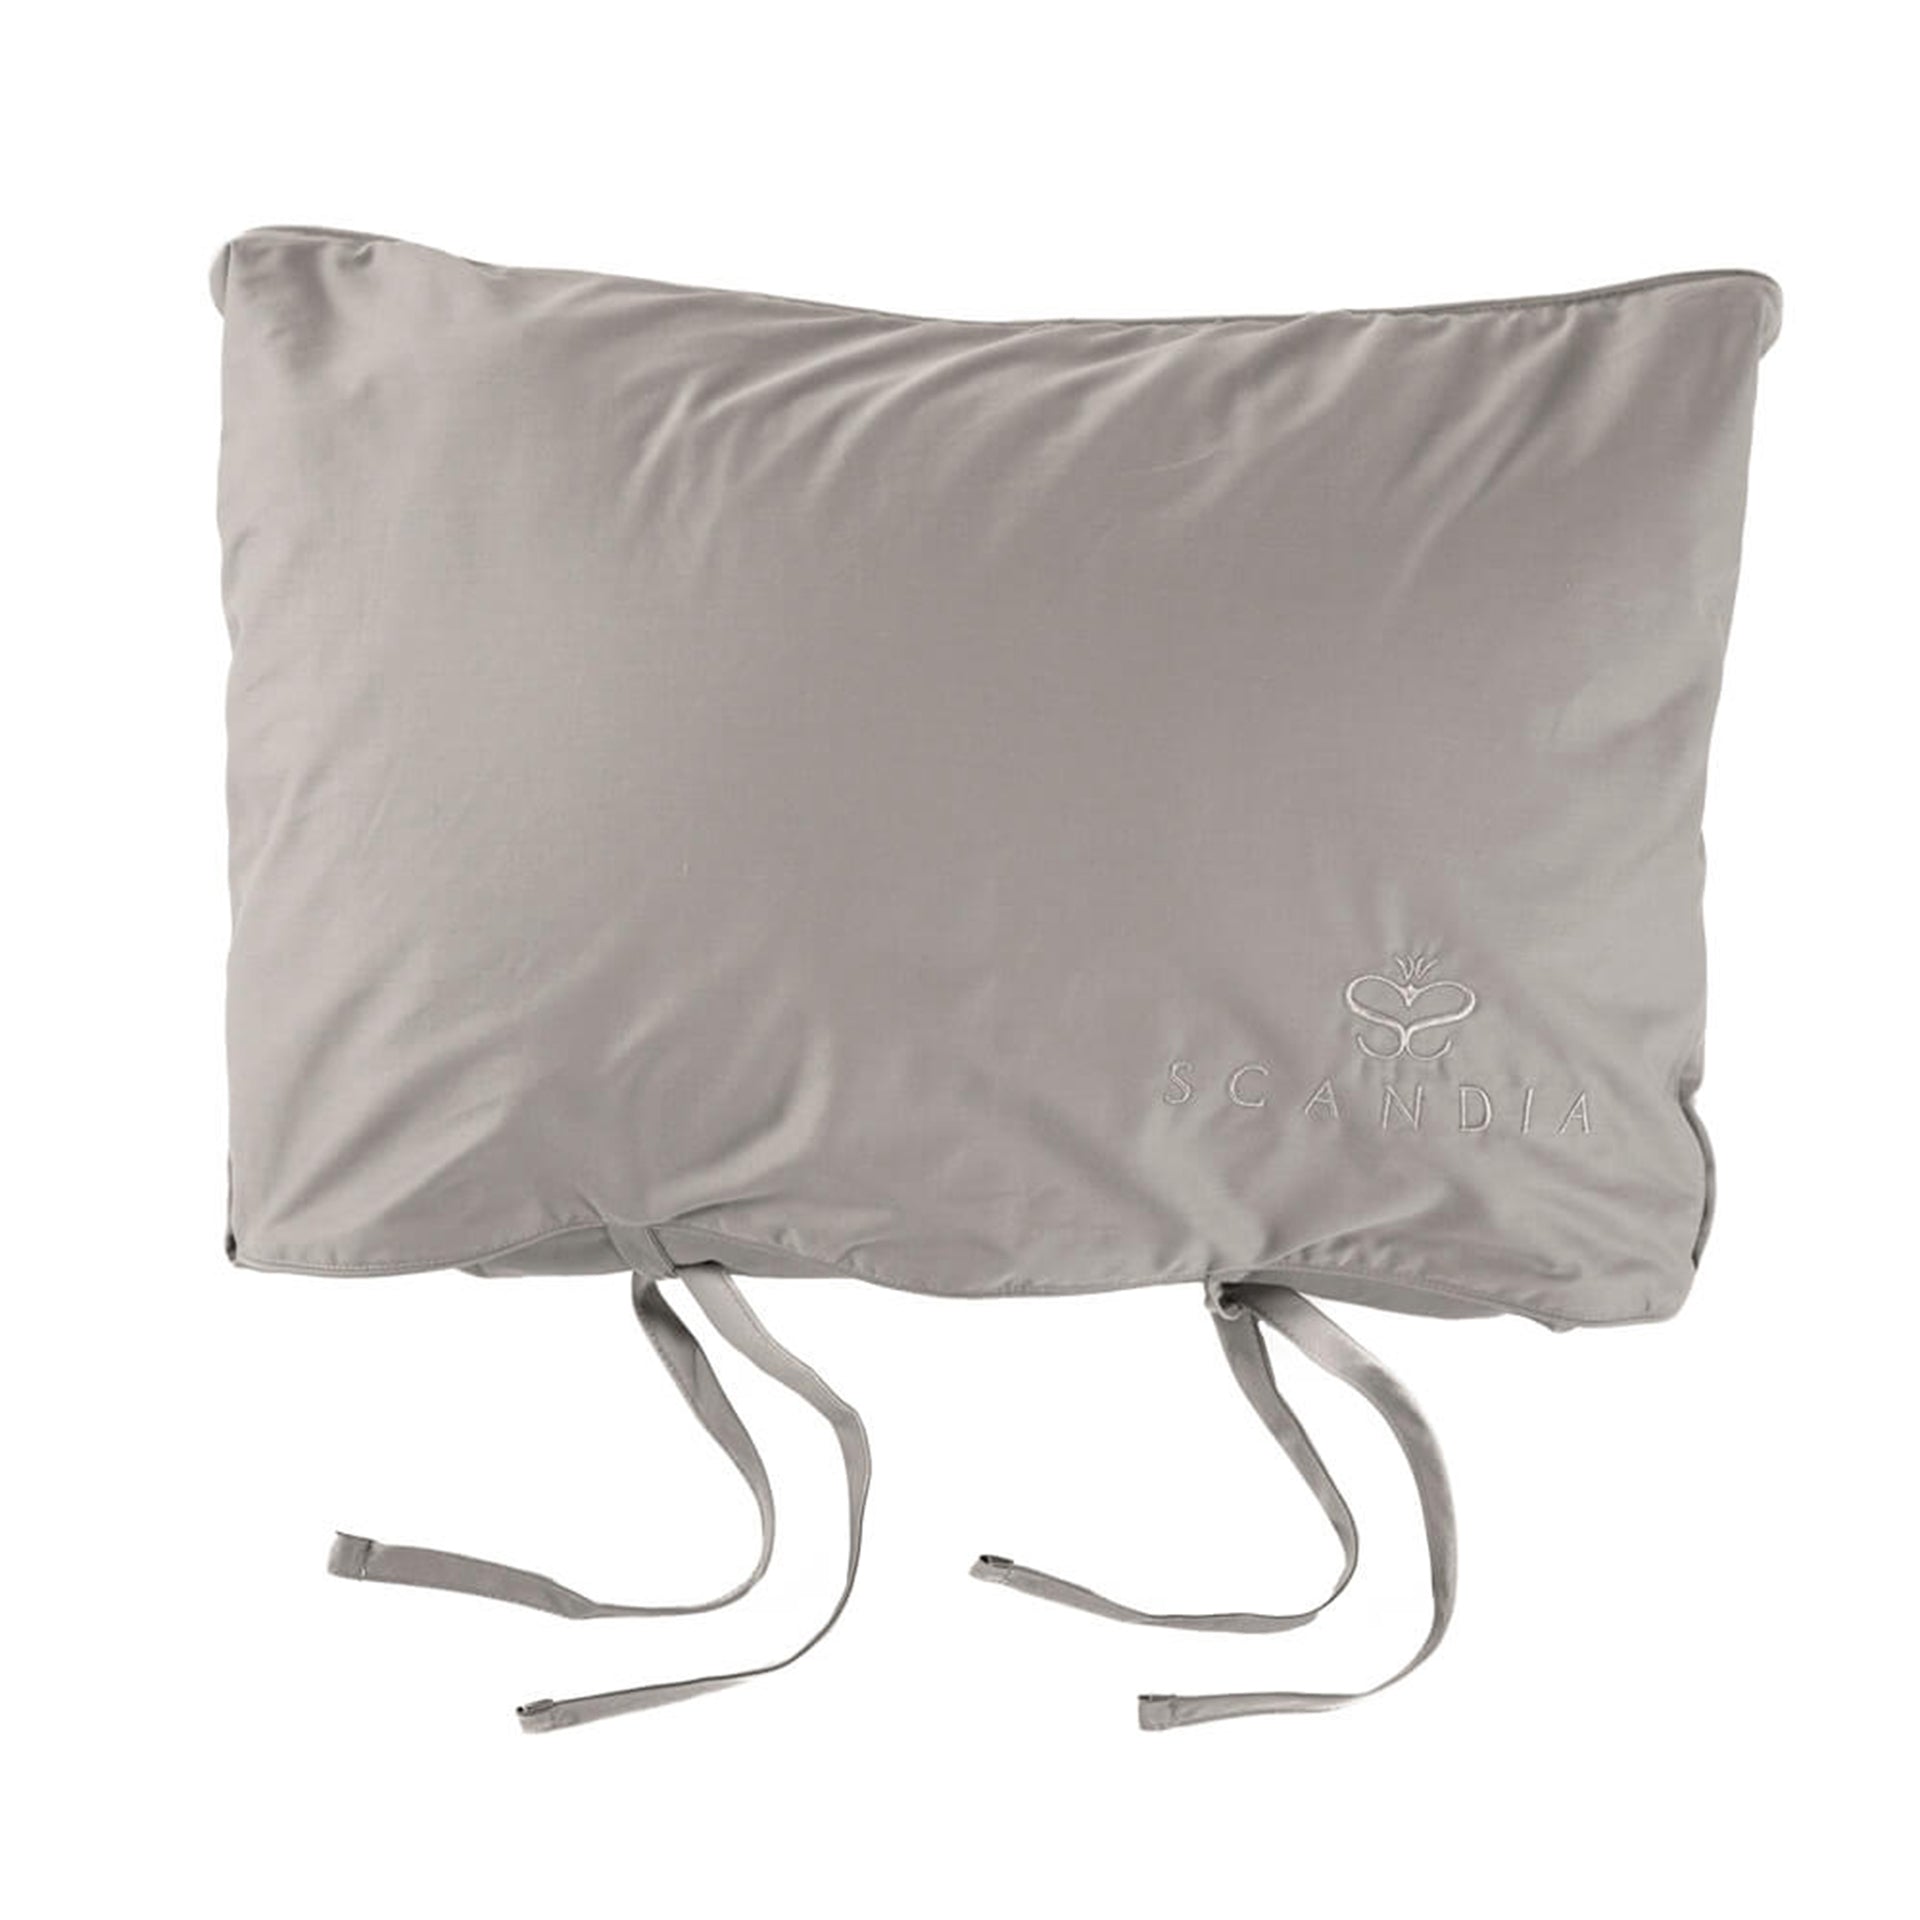 scandia home down travel attache covered in a sateen cotton in color shale, the perfect travel companion, 